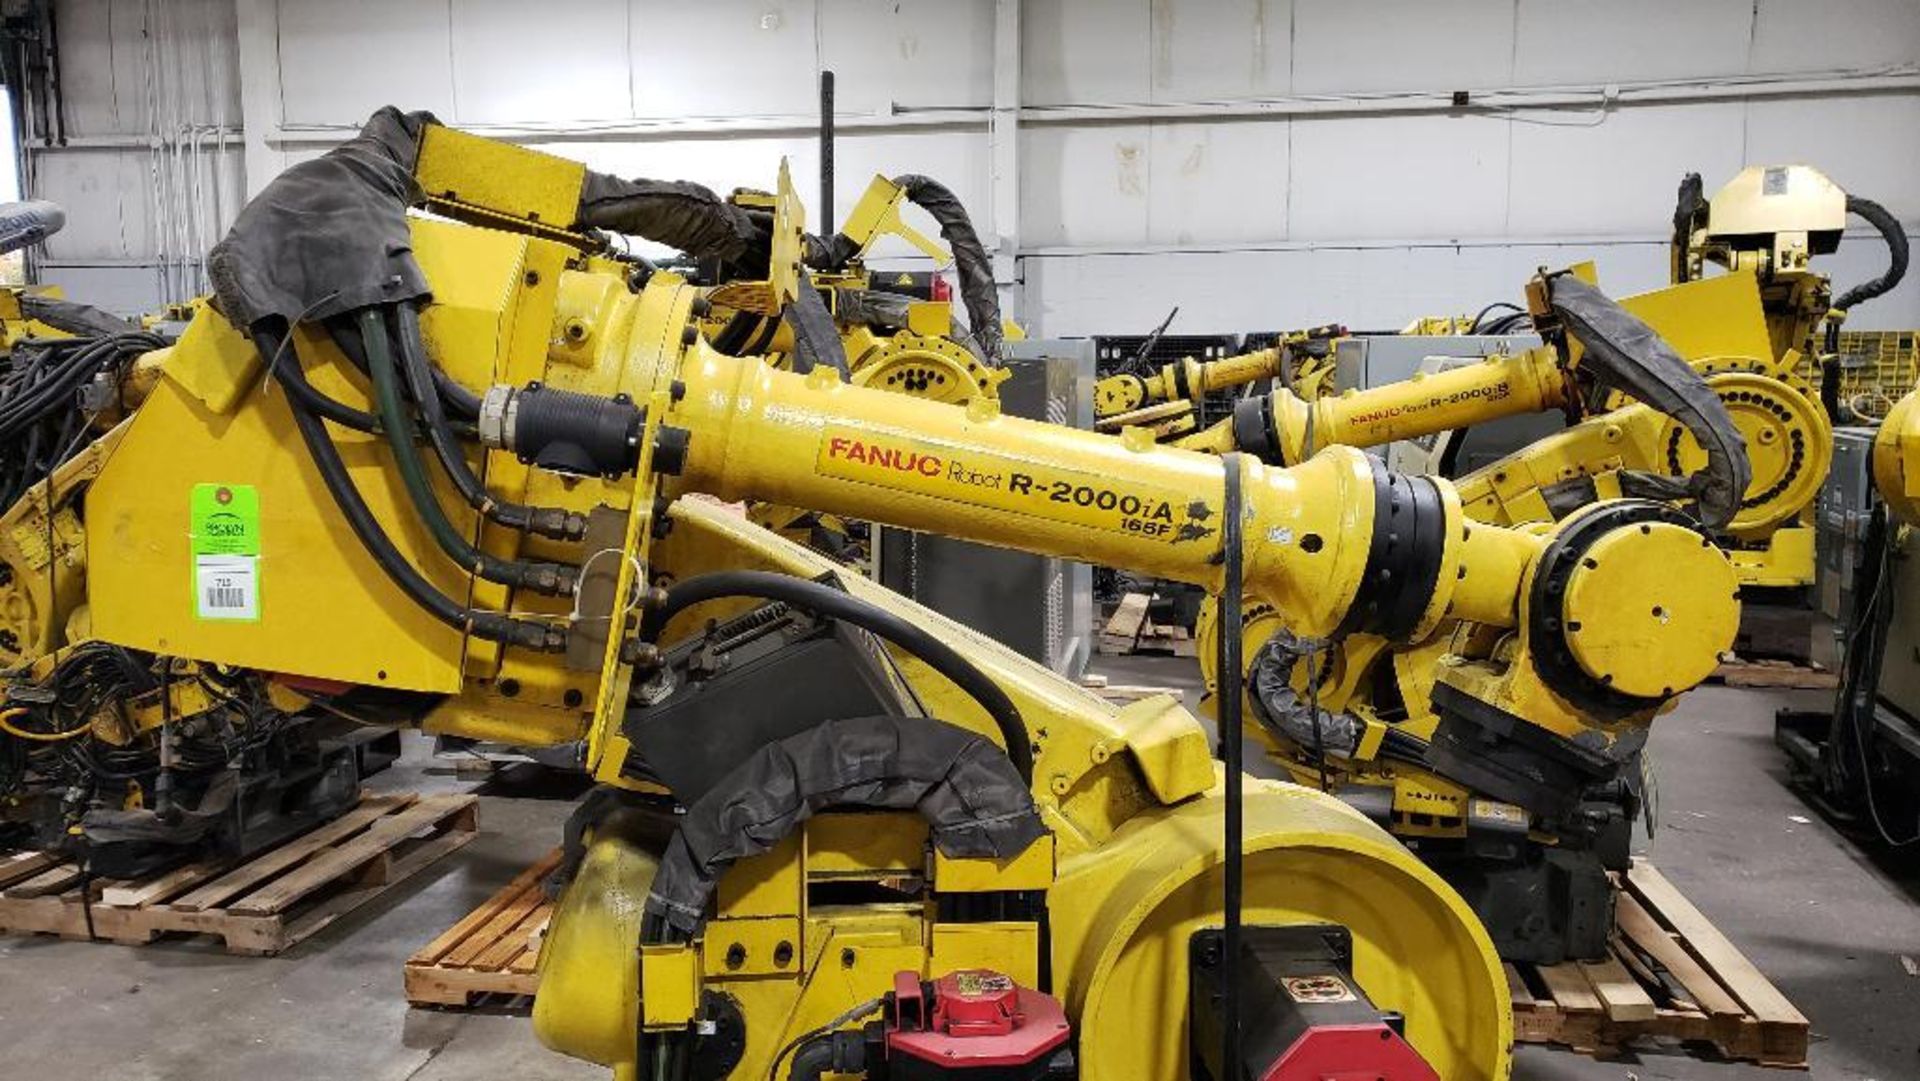 Fanuc R-2000iA/165F robot 6-axis arm. - Image 3 of 6